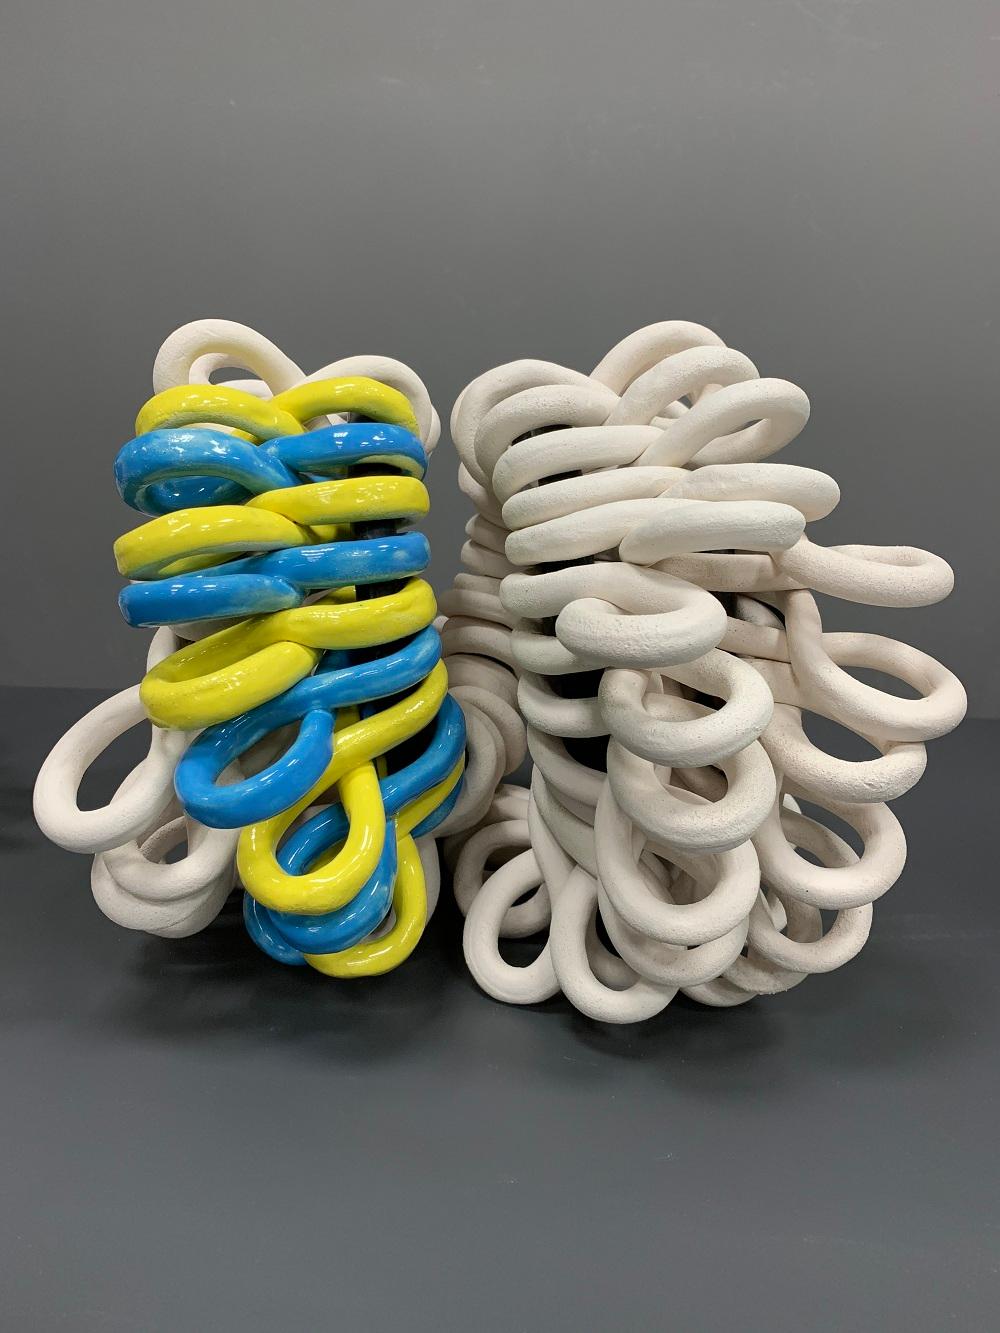 Materials: Chamotte, glazing, manual molding

The series presents a symbol of spiral and infinity, consisting of many ceramic symbols of infinity. It is a symbol of life and death. It is a constant movement of the universe and man in it, a change of